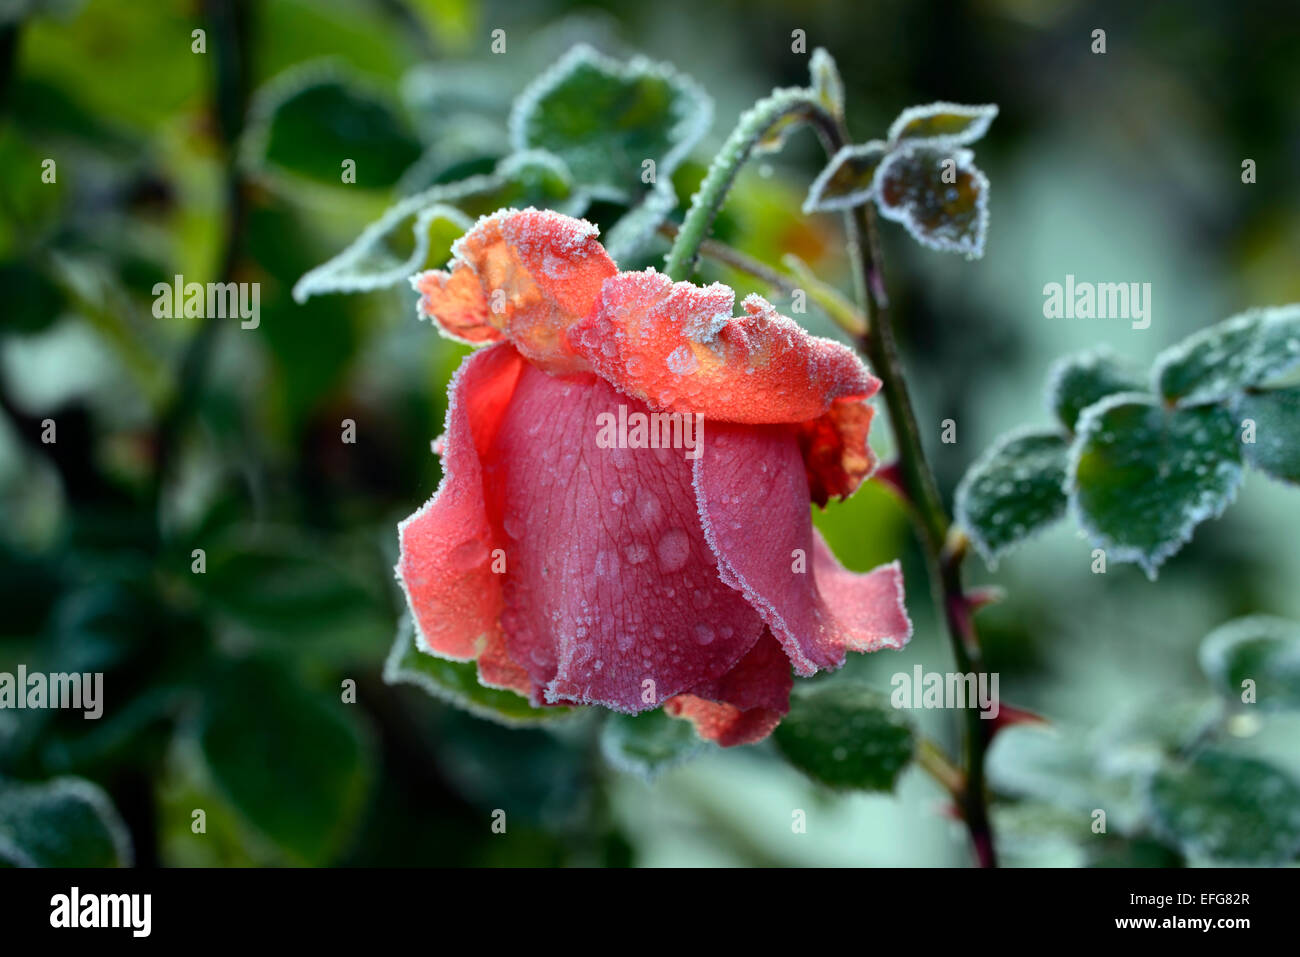 Rosa Alexander Rose High Resolution Stock Photography and Images - Alamy